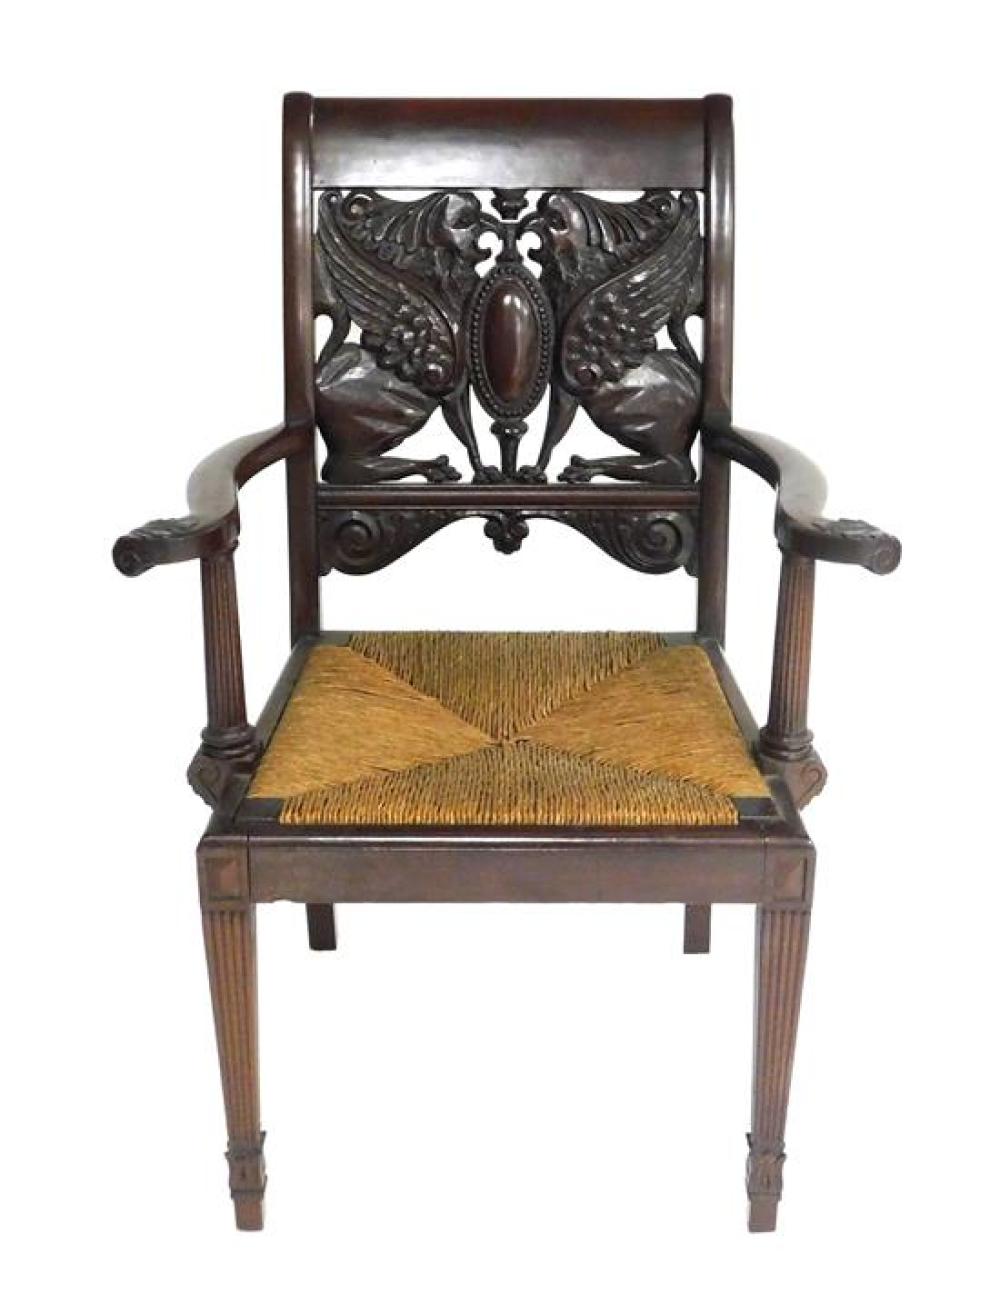 ARMCHAIR WITH ORNATE CARVED GRIFFIN 31d074